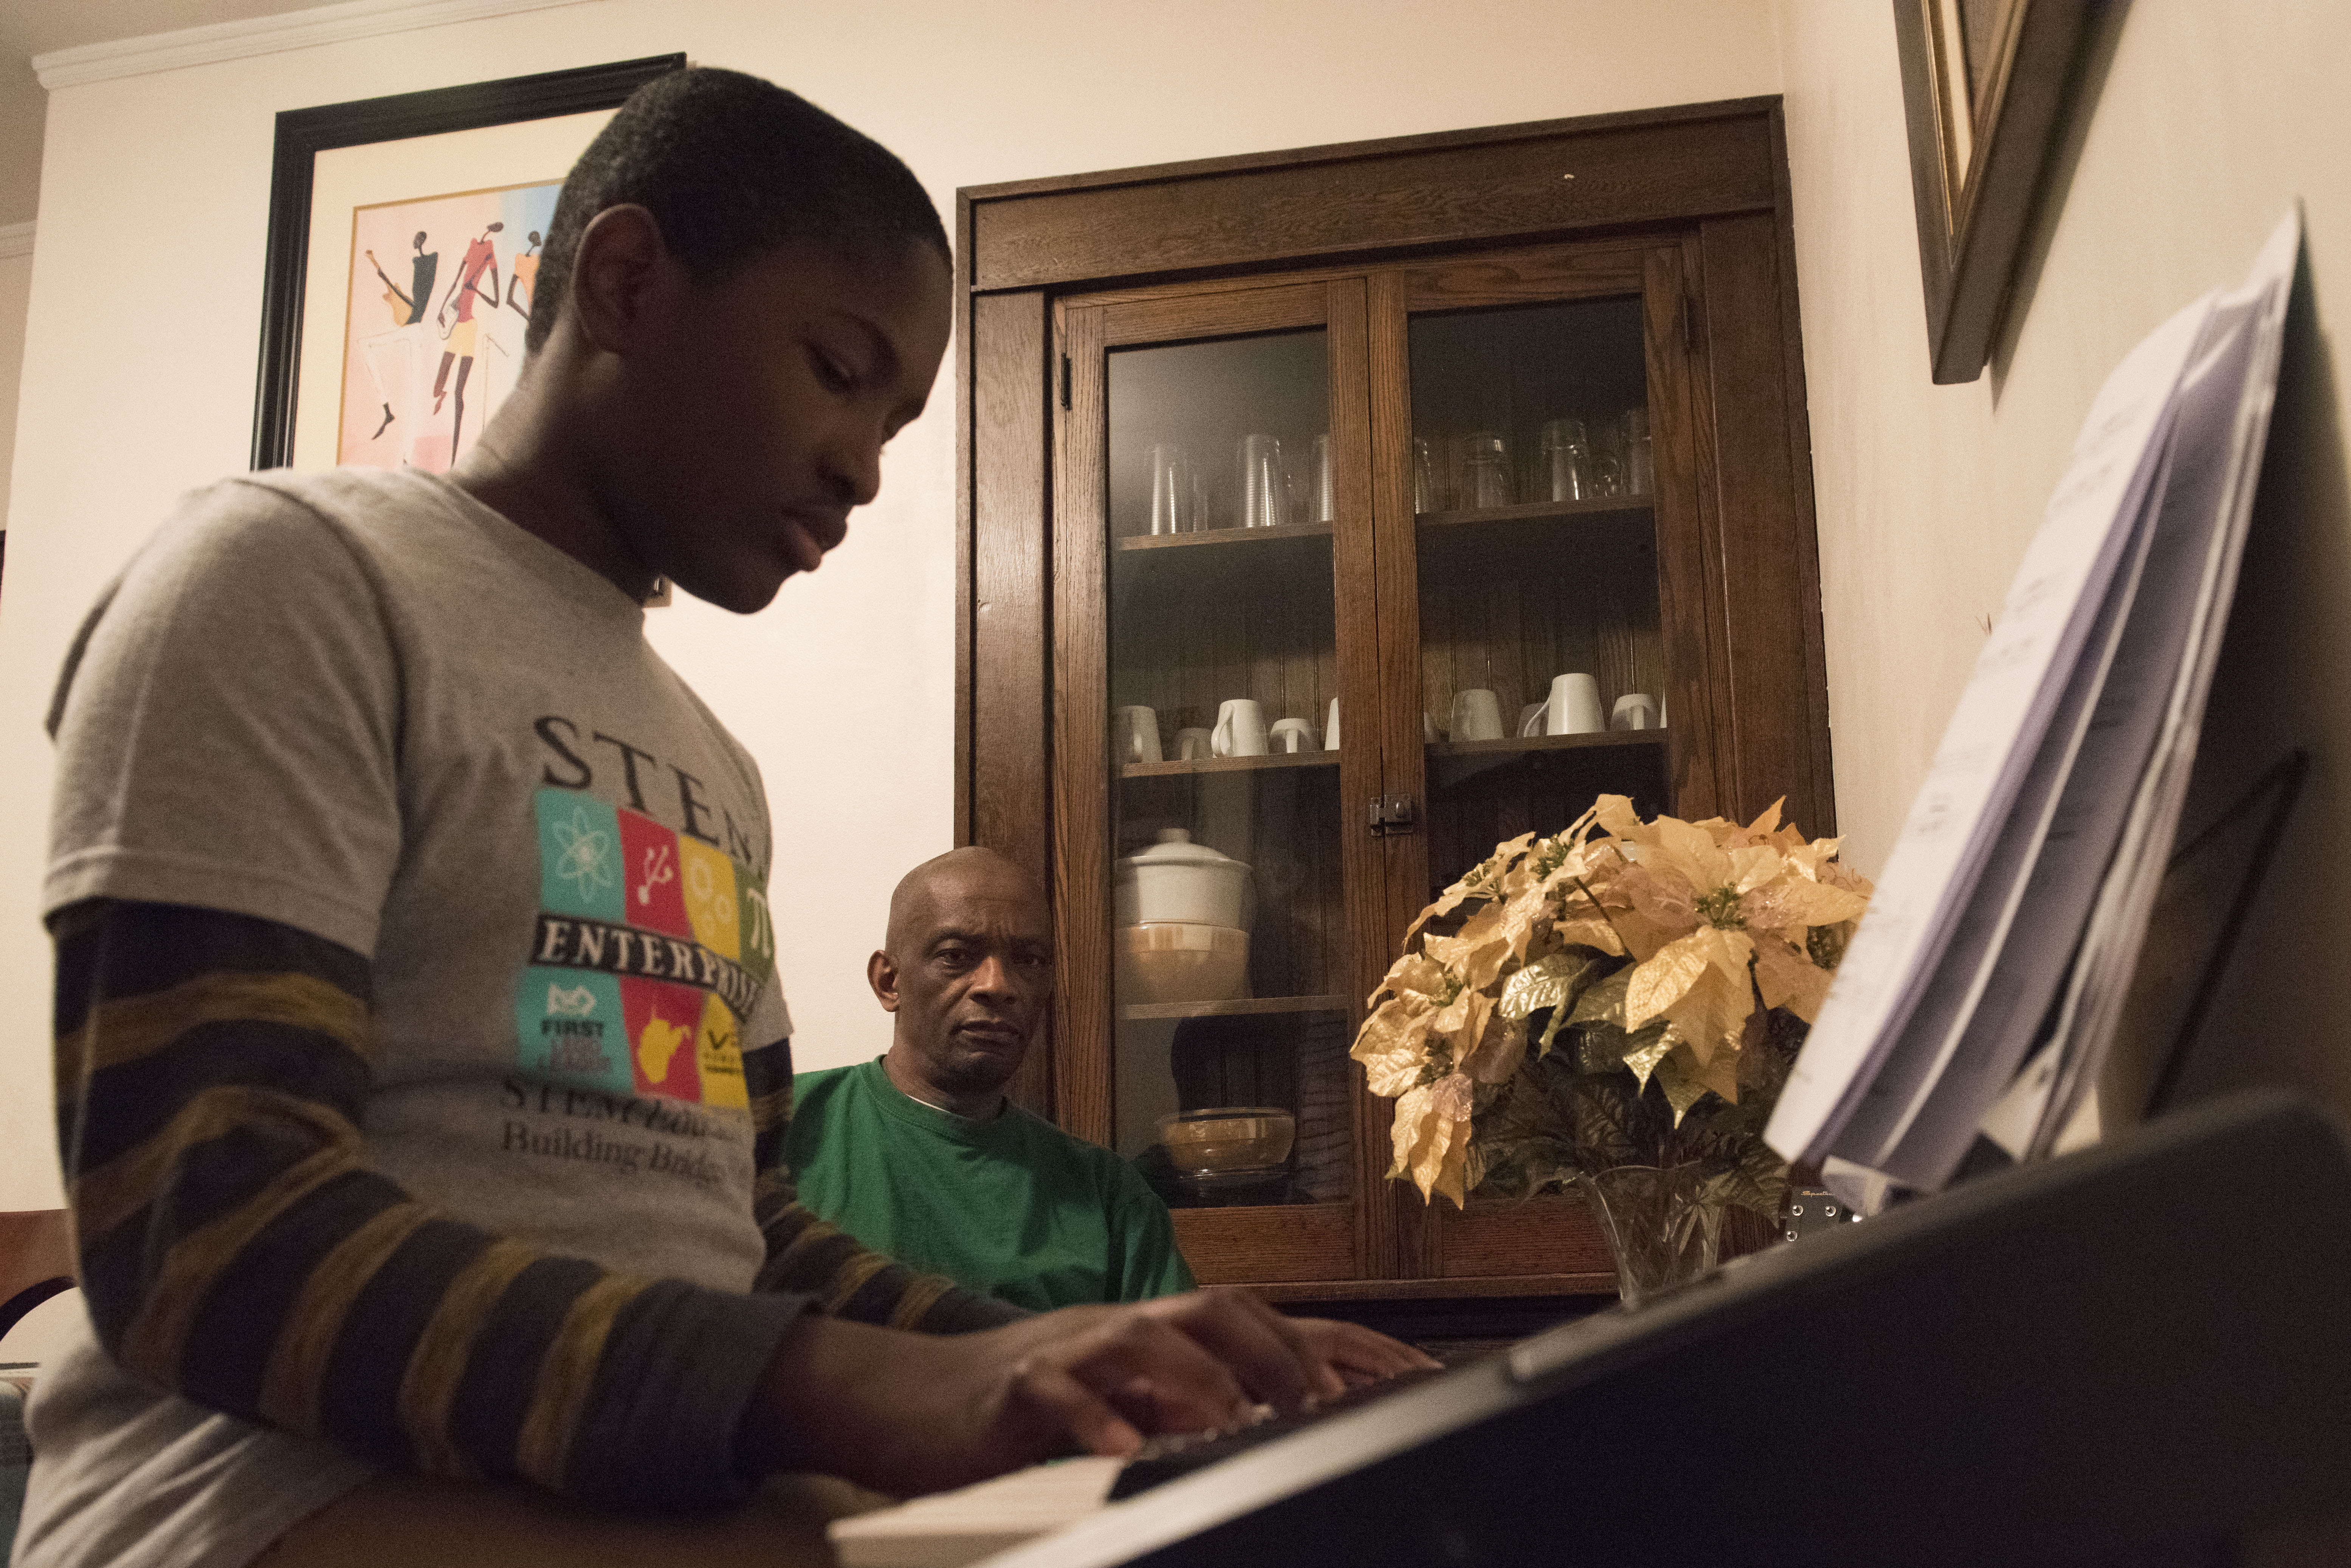 In their dining room, Tamba watches his son play piano which he has been practicing for years.